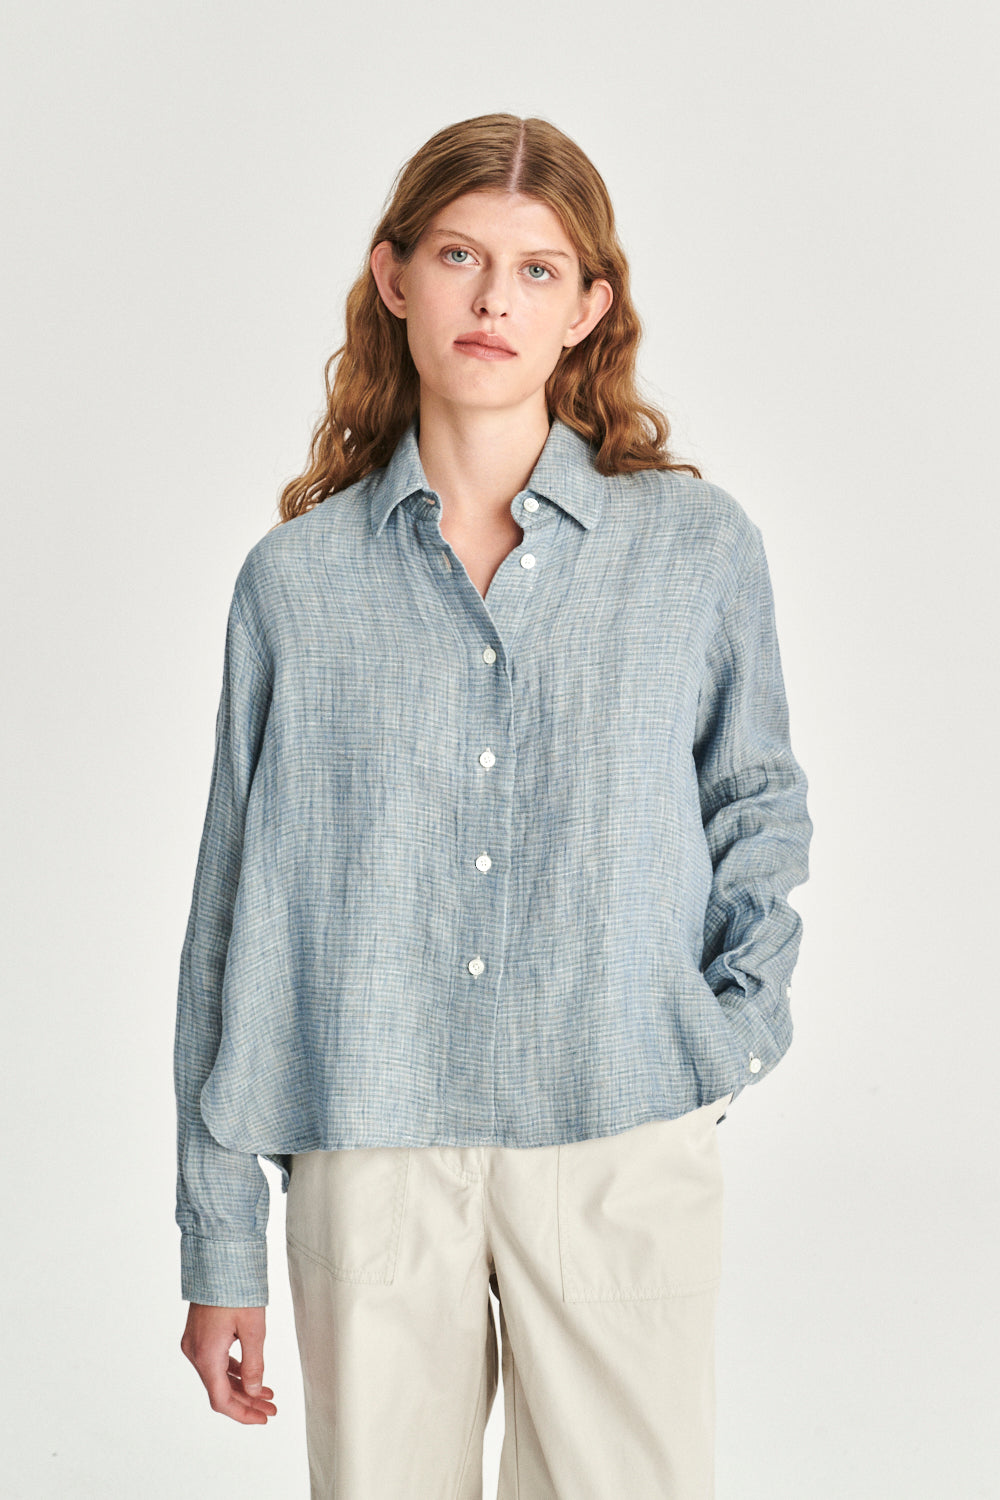 Relaxed Shirt in a Double Sided Blue and Green Fatigue Italian Linen and Cotton